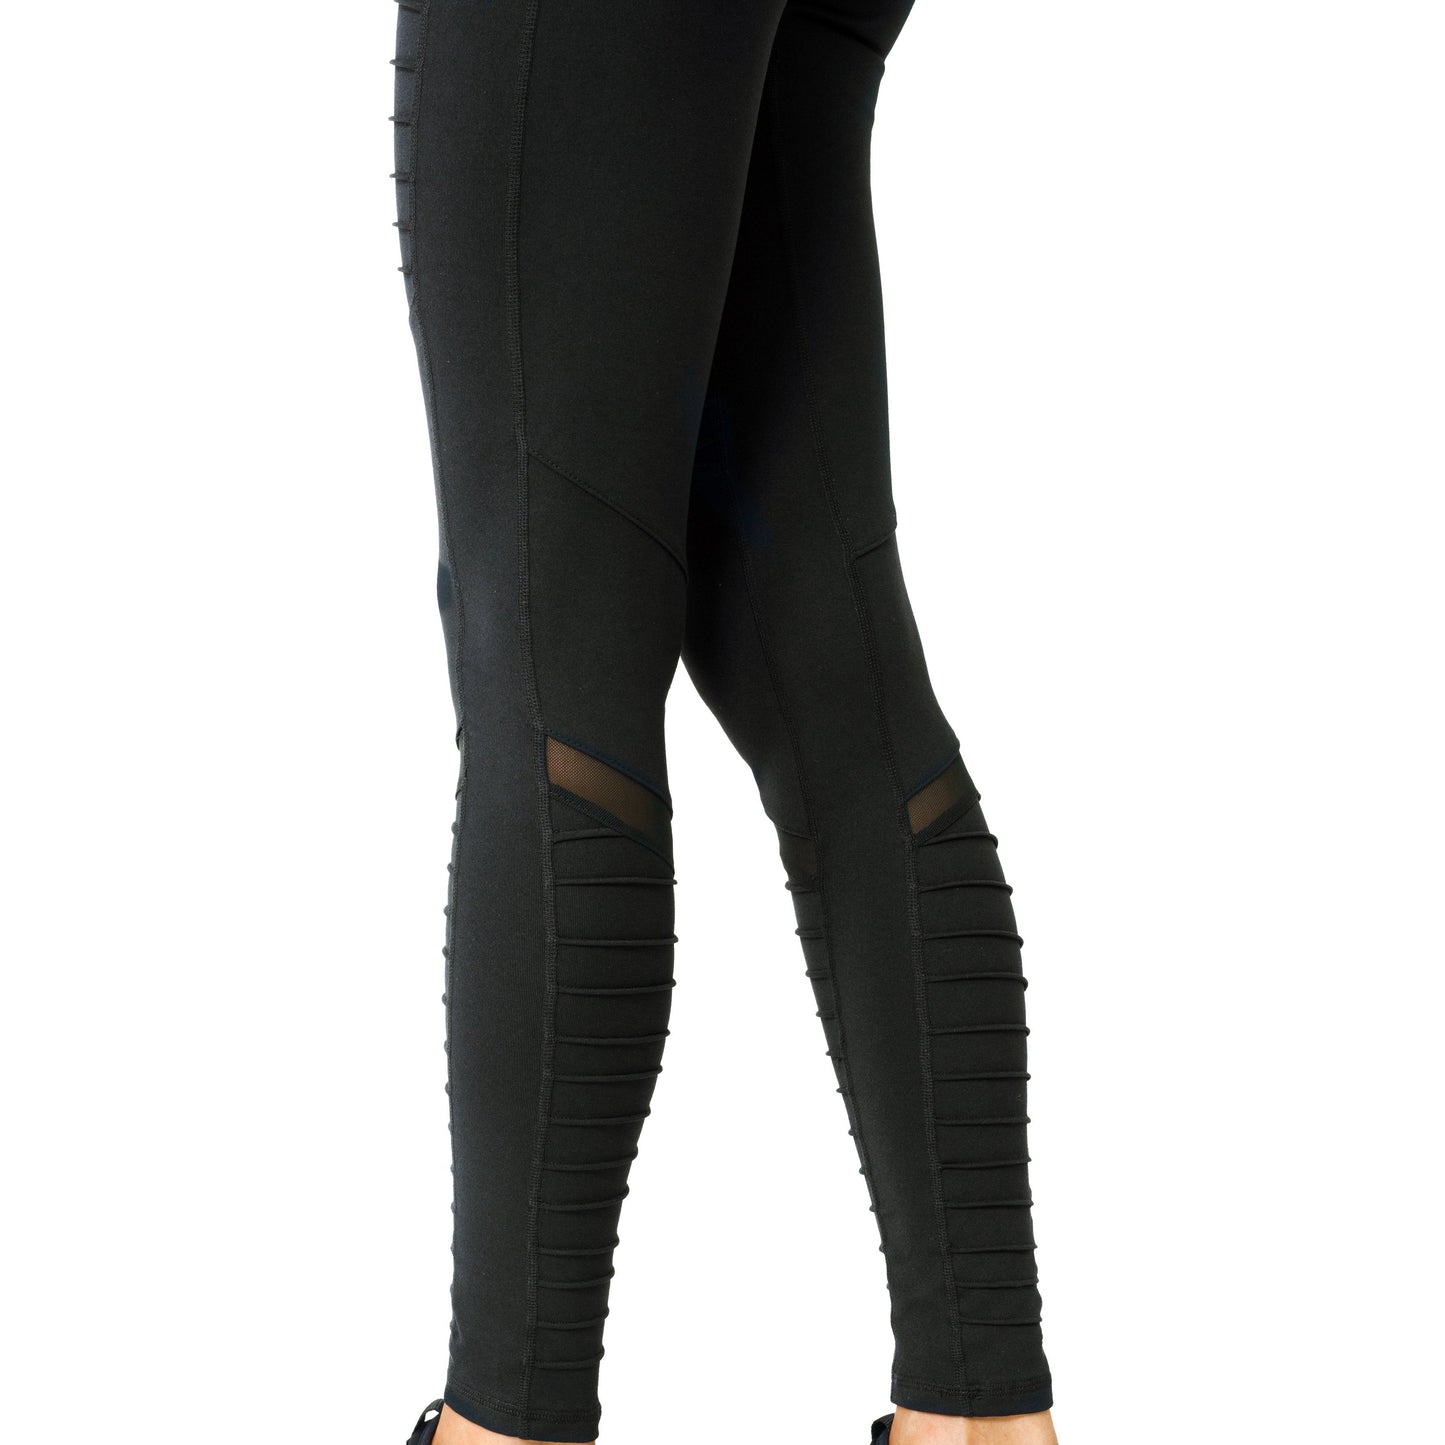 Athletique Low-Waisted Ribbed Leggings With Hidden Pocket and Mesh Panels - Black